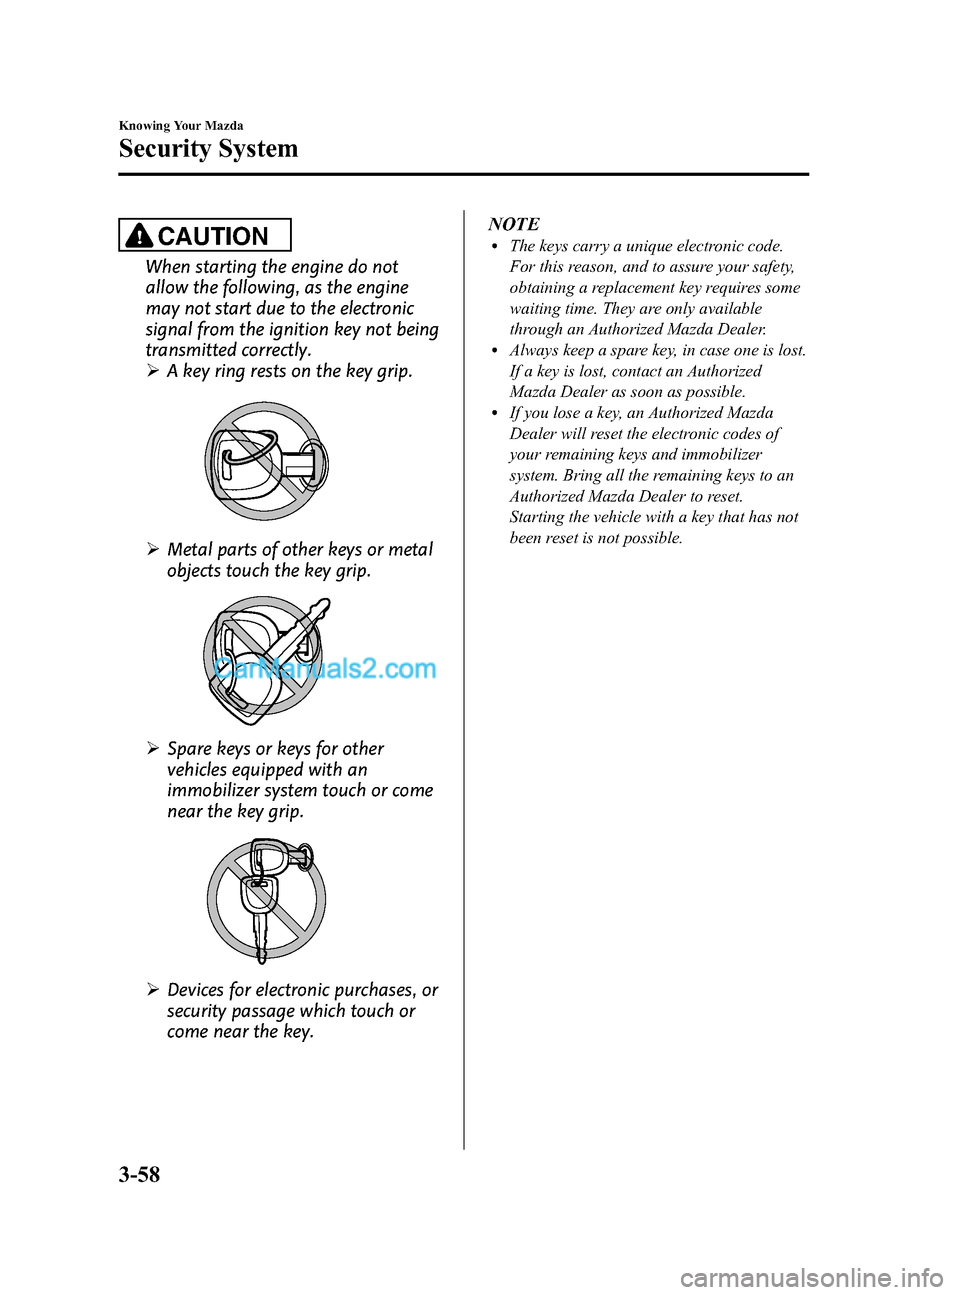 MAZDA MODEL CX-9 2015  Owners Manual (in English) Black plate (146,1)
CAUTION
When starting the engine do not
allow the following, as the engine
may not start due to the electronic
signal from the ignition key not being
transmitted correctly.
ØA key